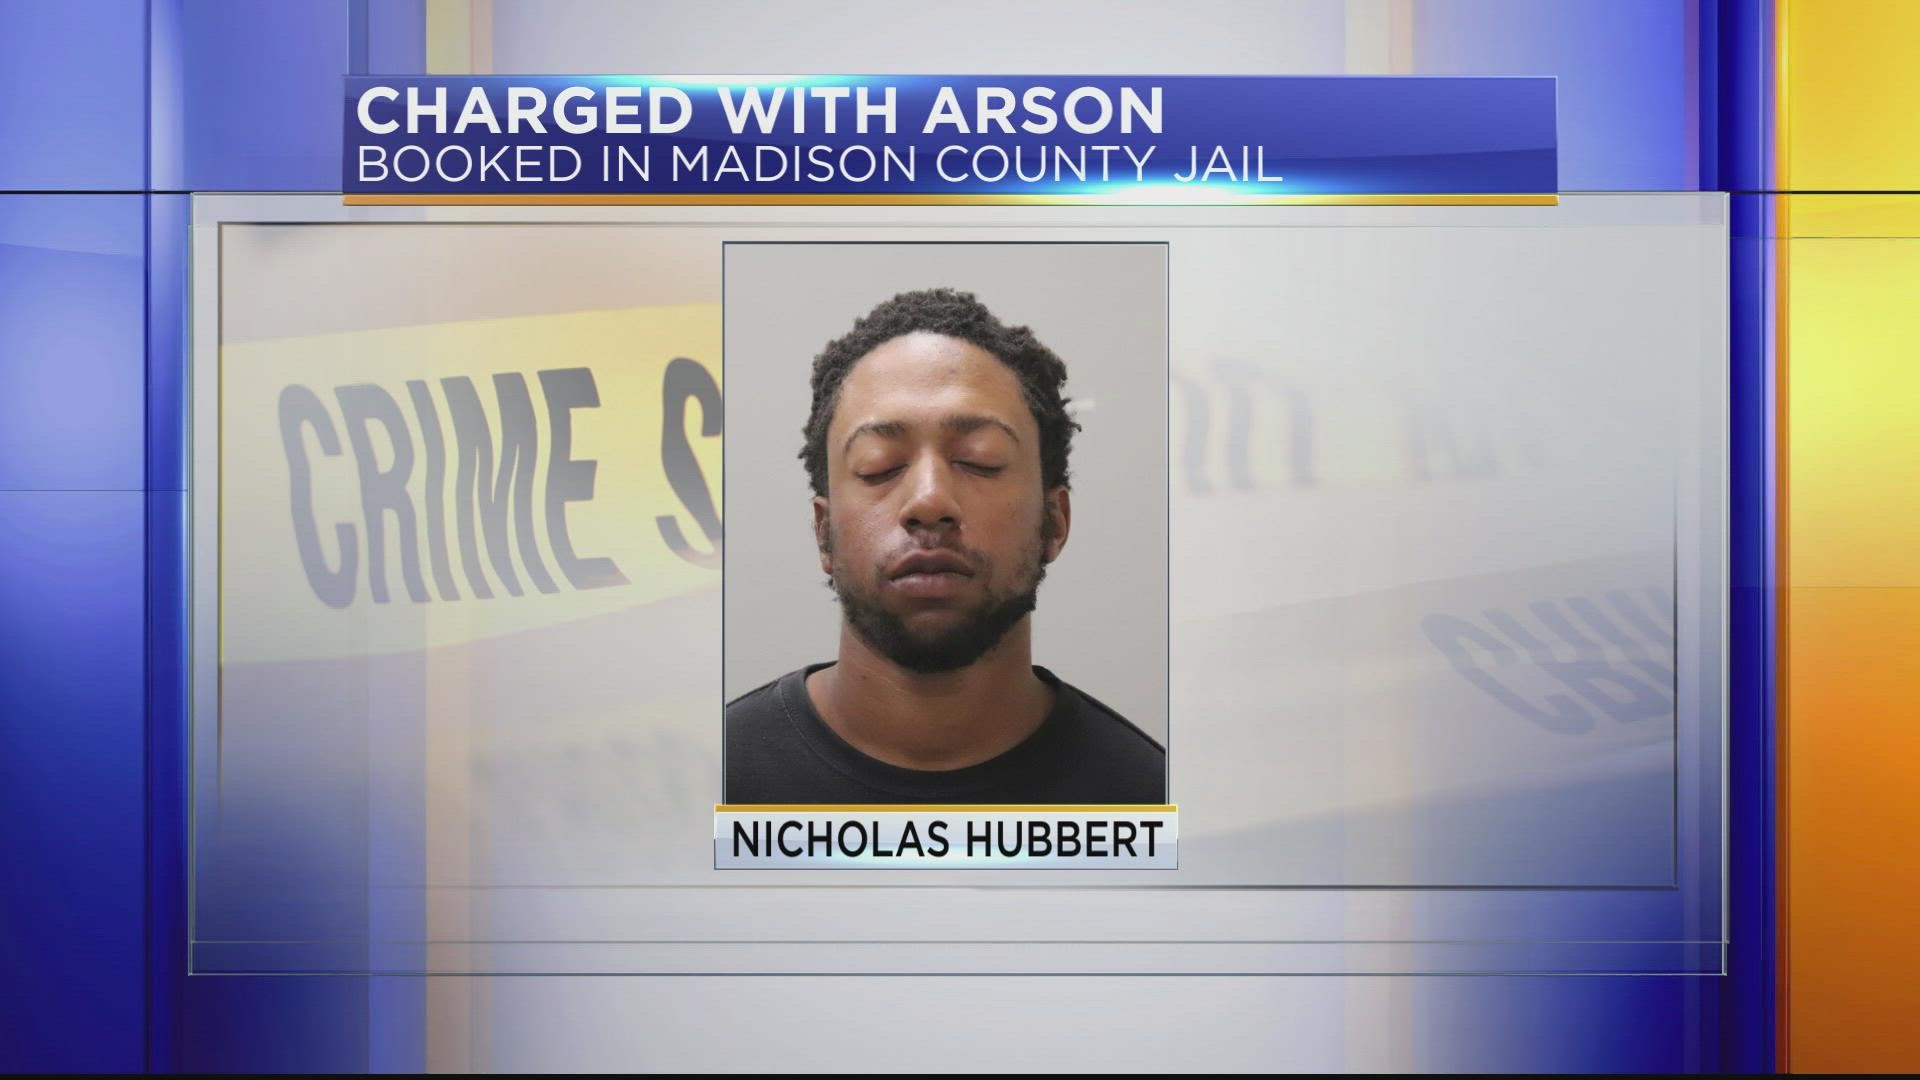 Police say the man was charged with arson and booked into the Madison County Jail in the early morning hours of September 26.